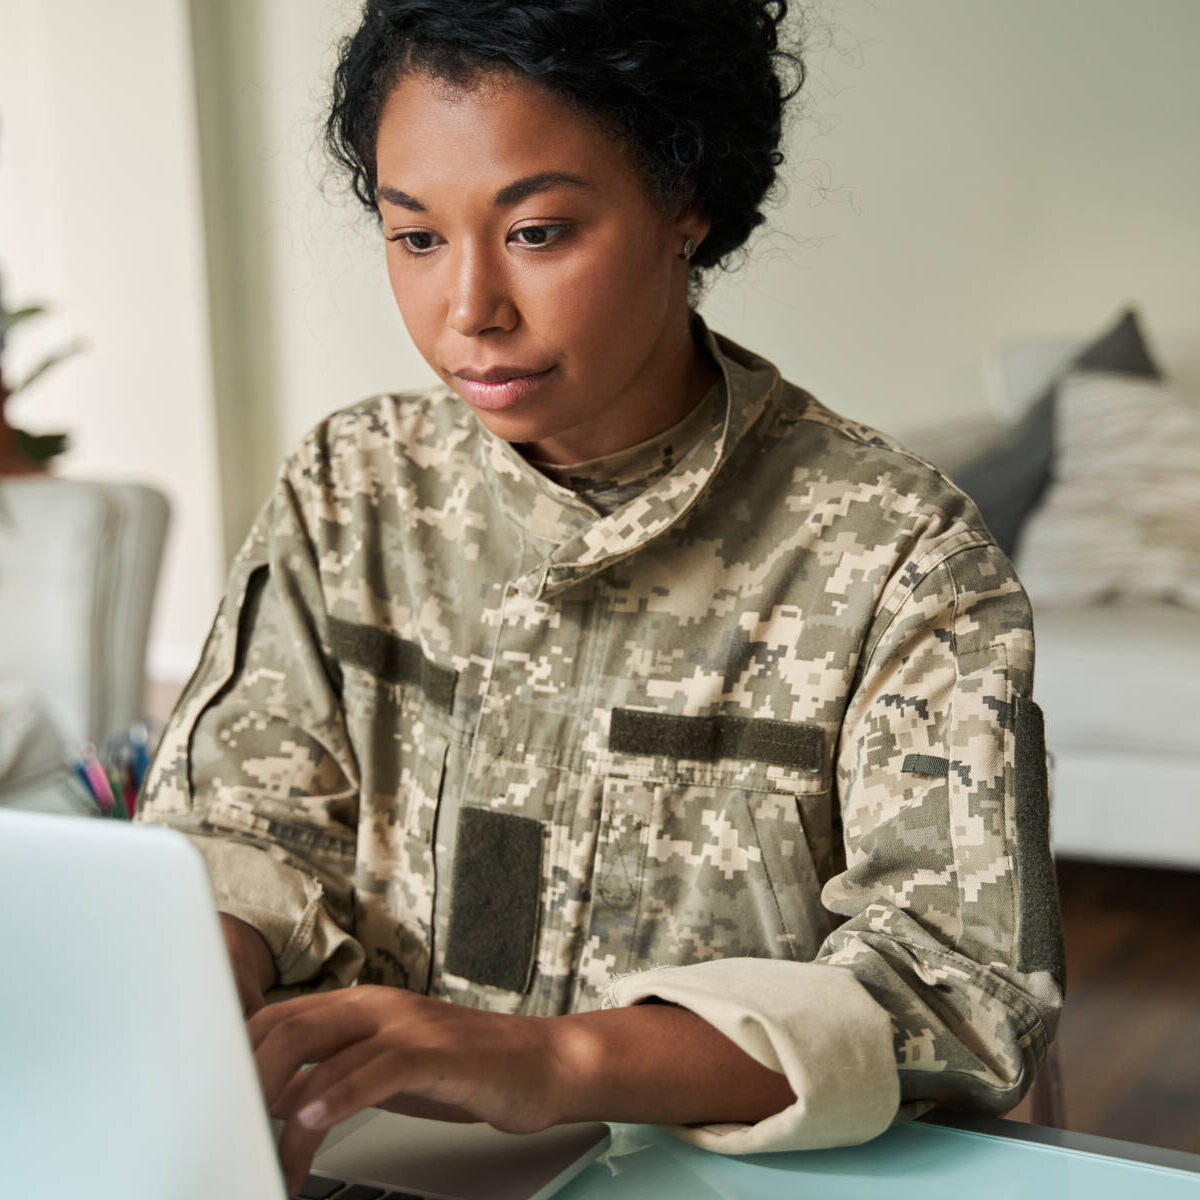 Focused black woman using laptop at table. Concept of modern woman. Female soldier wear camouflage uniform. After war rehabilitation. Blurred background of little boy. Interior of modern apartment